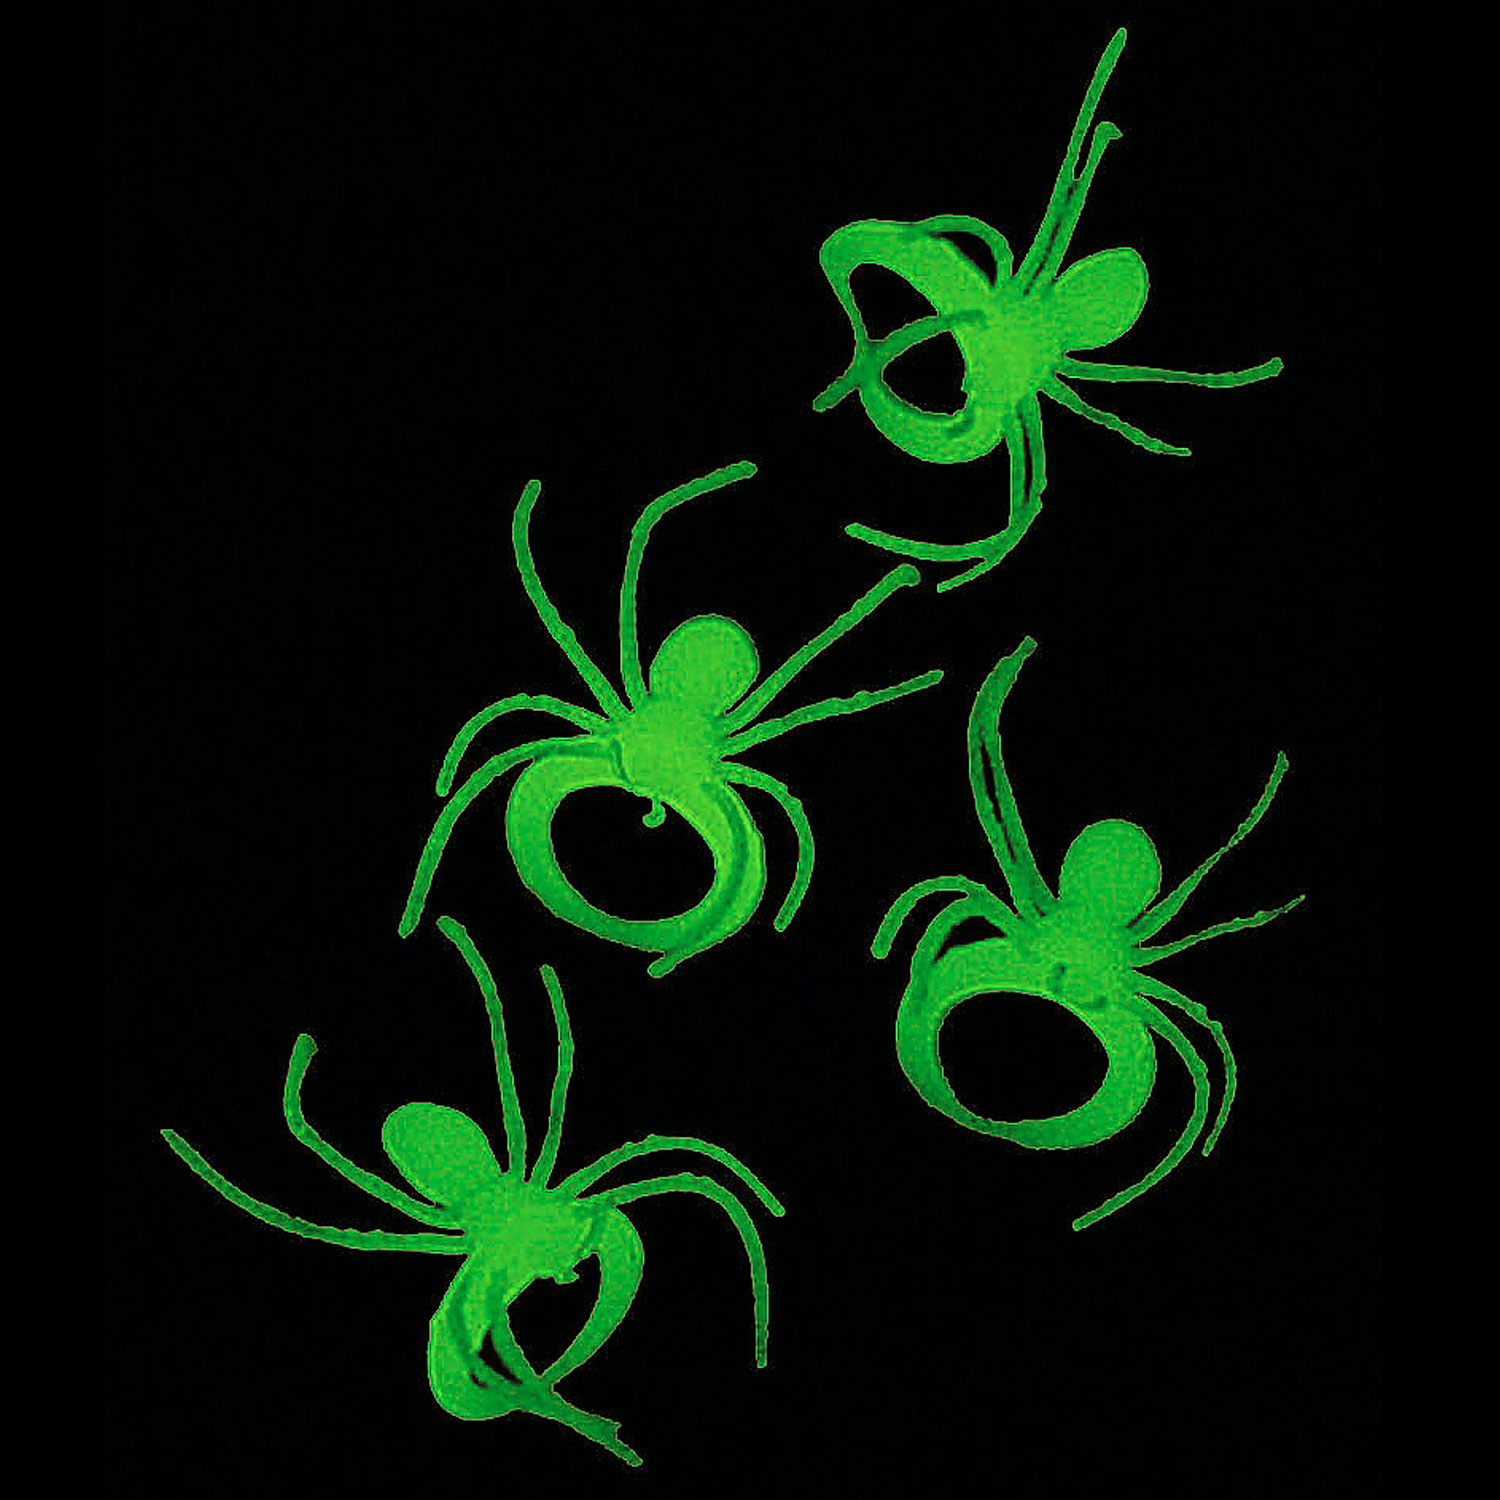 Glow In The Dark Spider Rings - 144 Count: Rebecca's Toys & Prizes